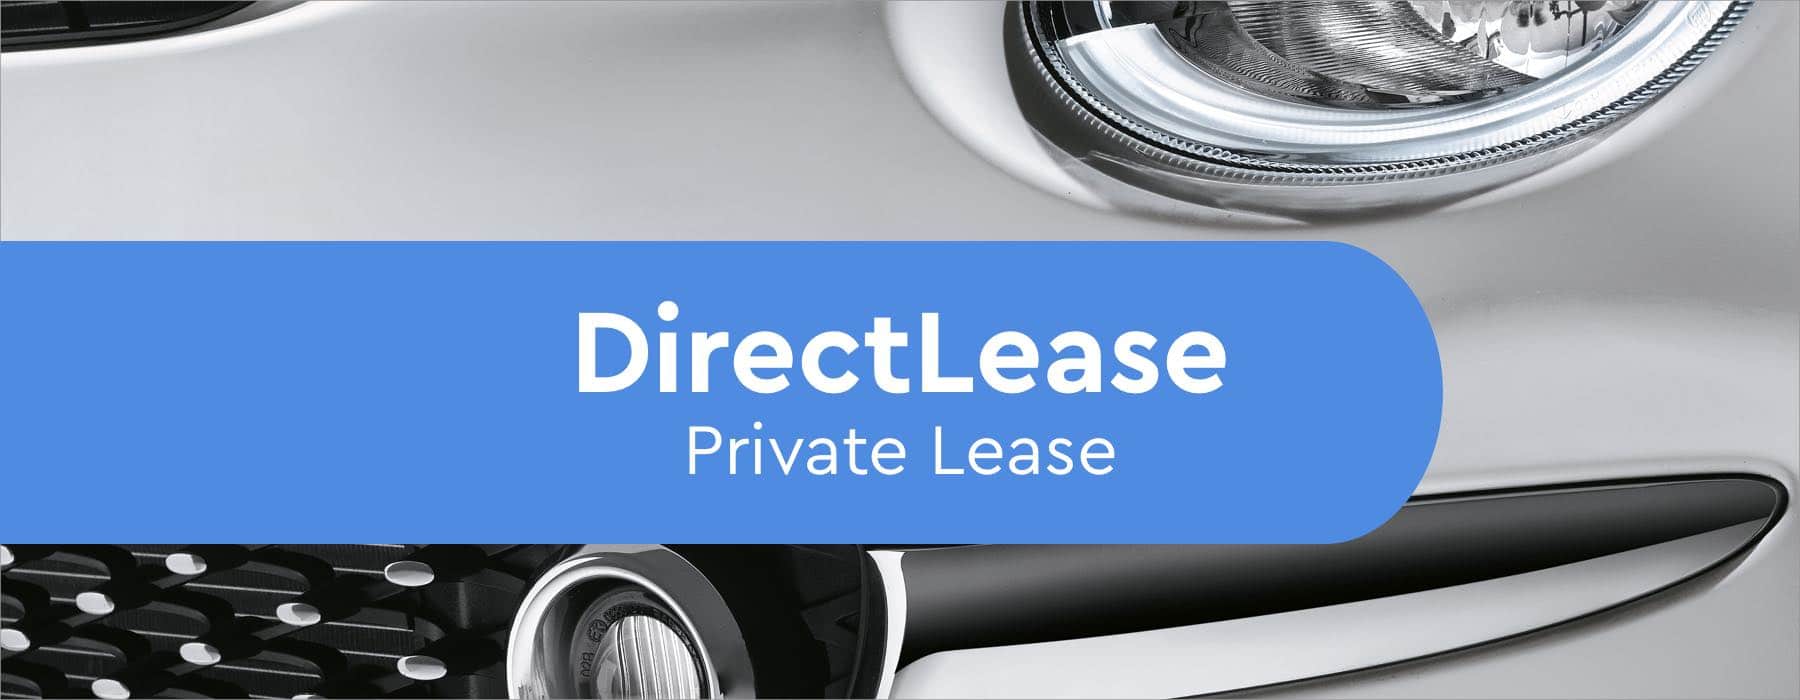 directlease Private Lease